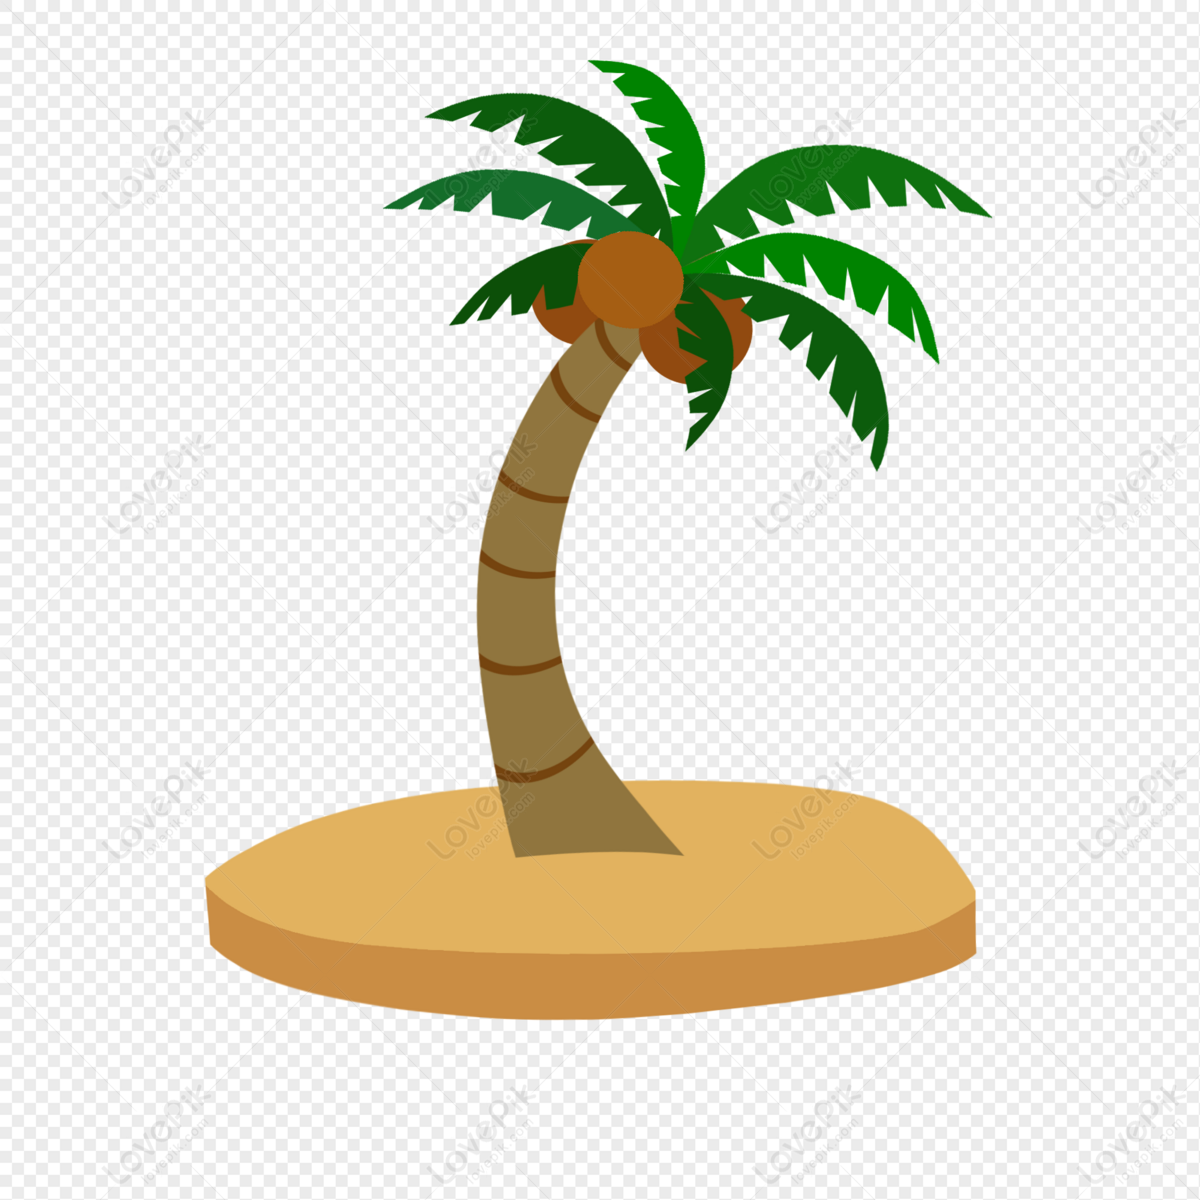 Coco On The Island PNG Transparent Background And Clipart Image For ...